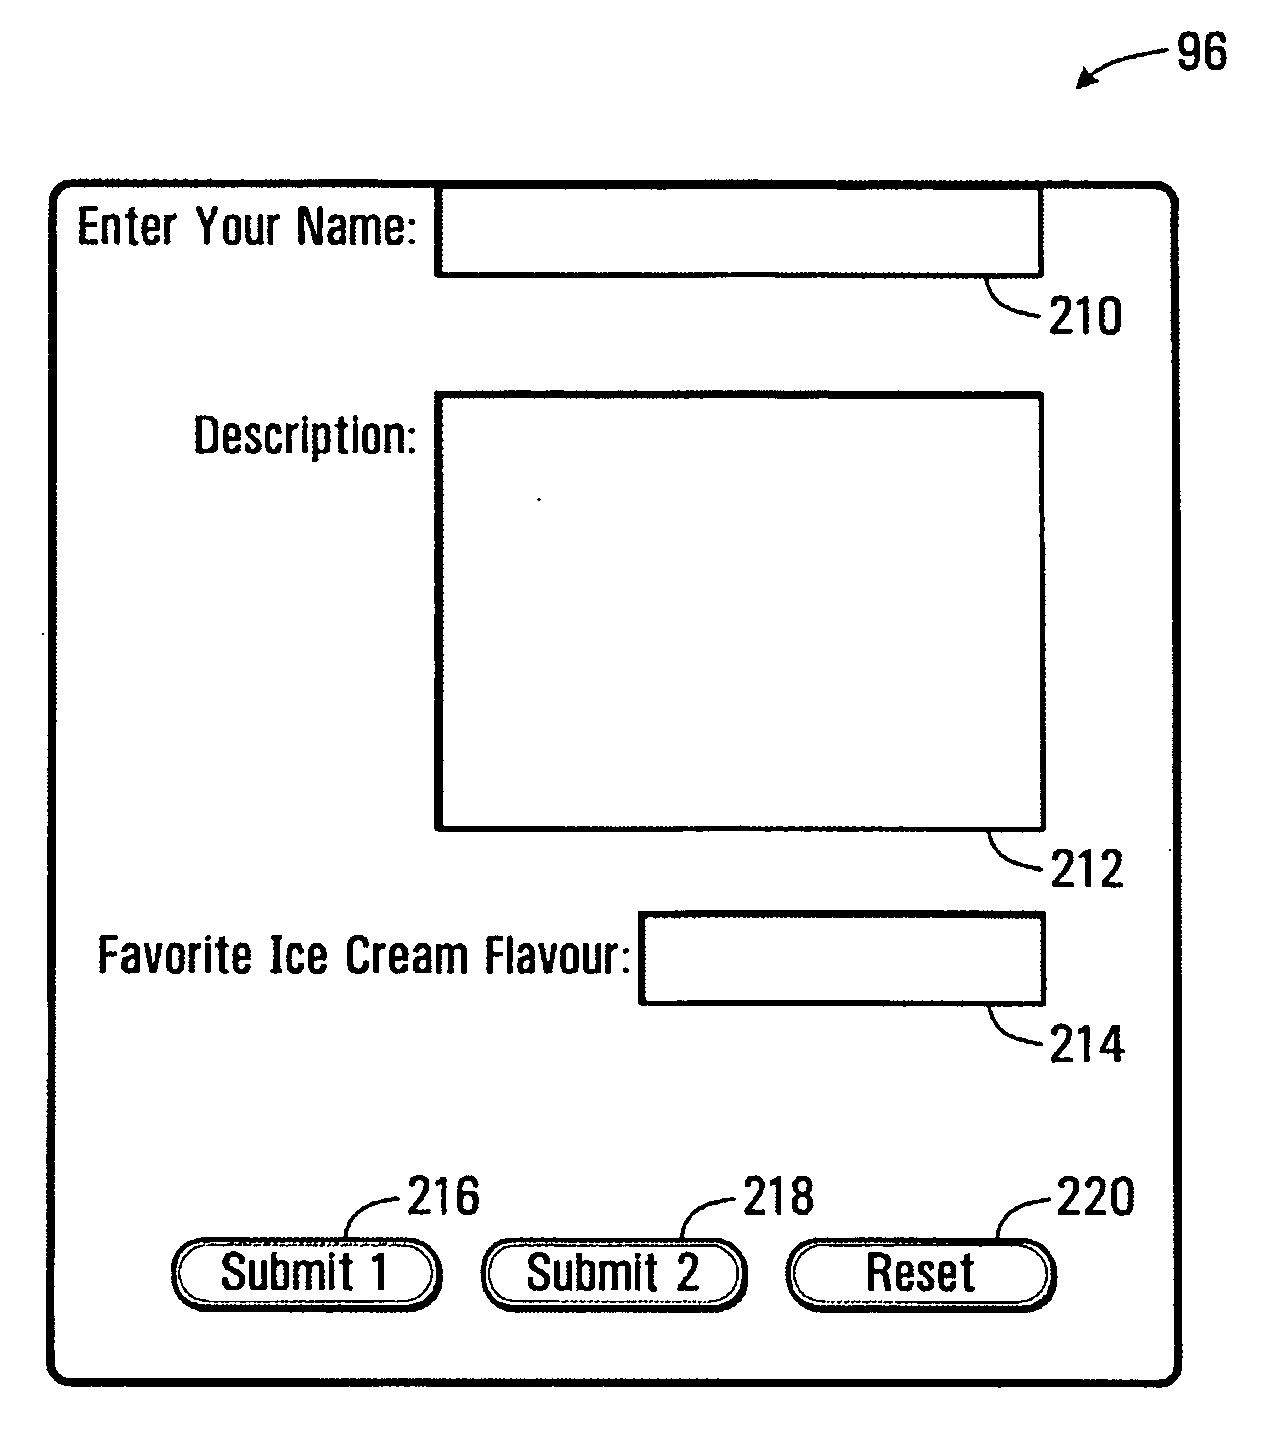 Displaying using graphics display language and native UI objects